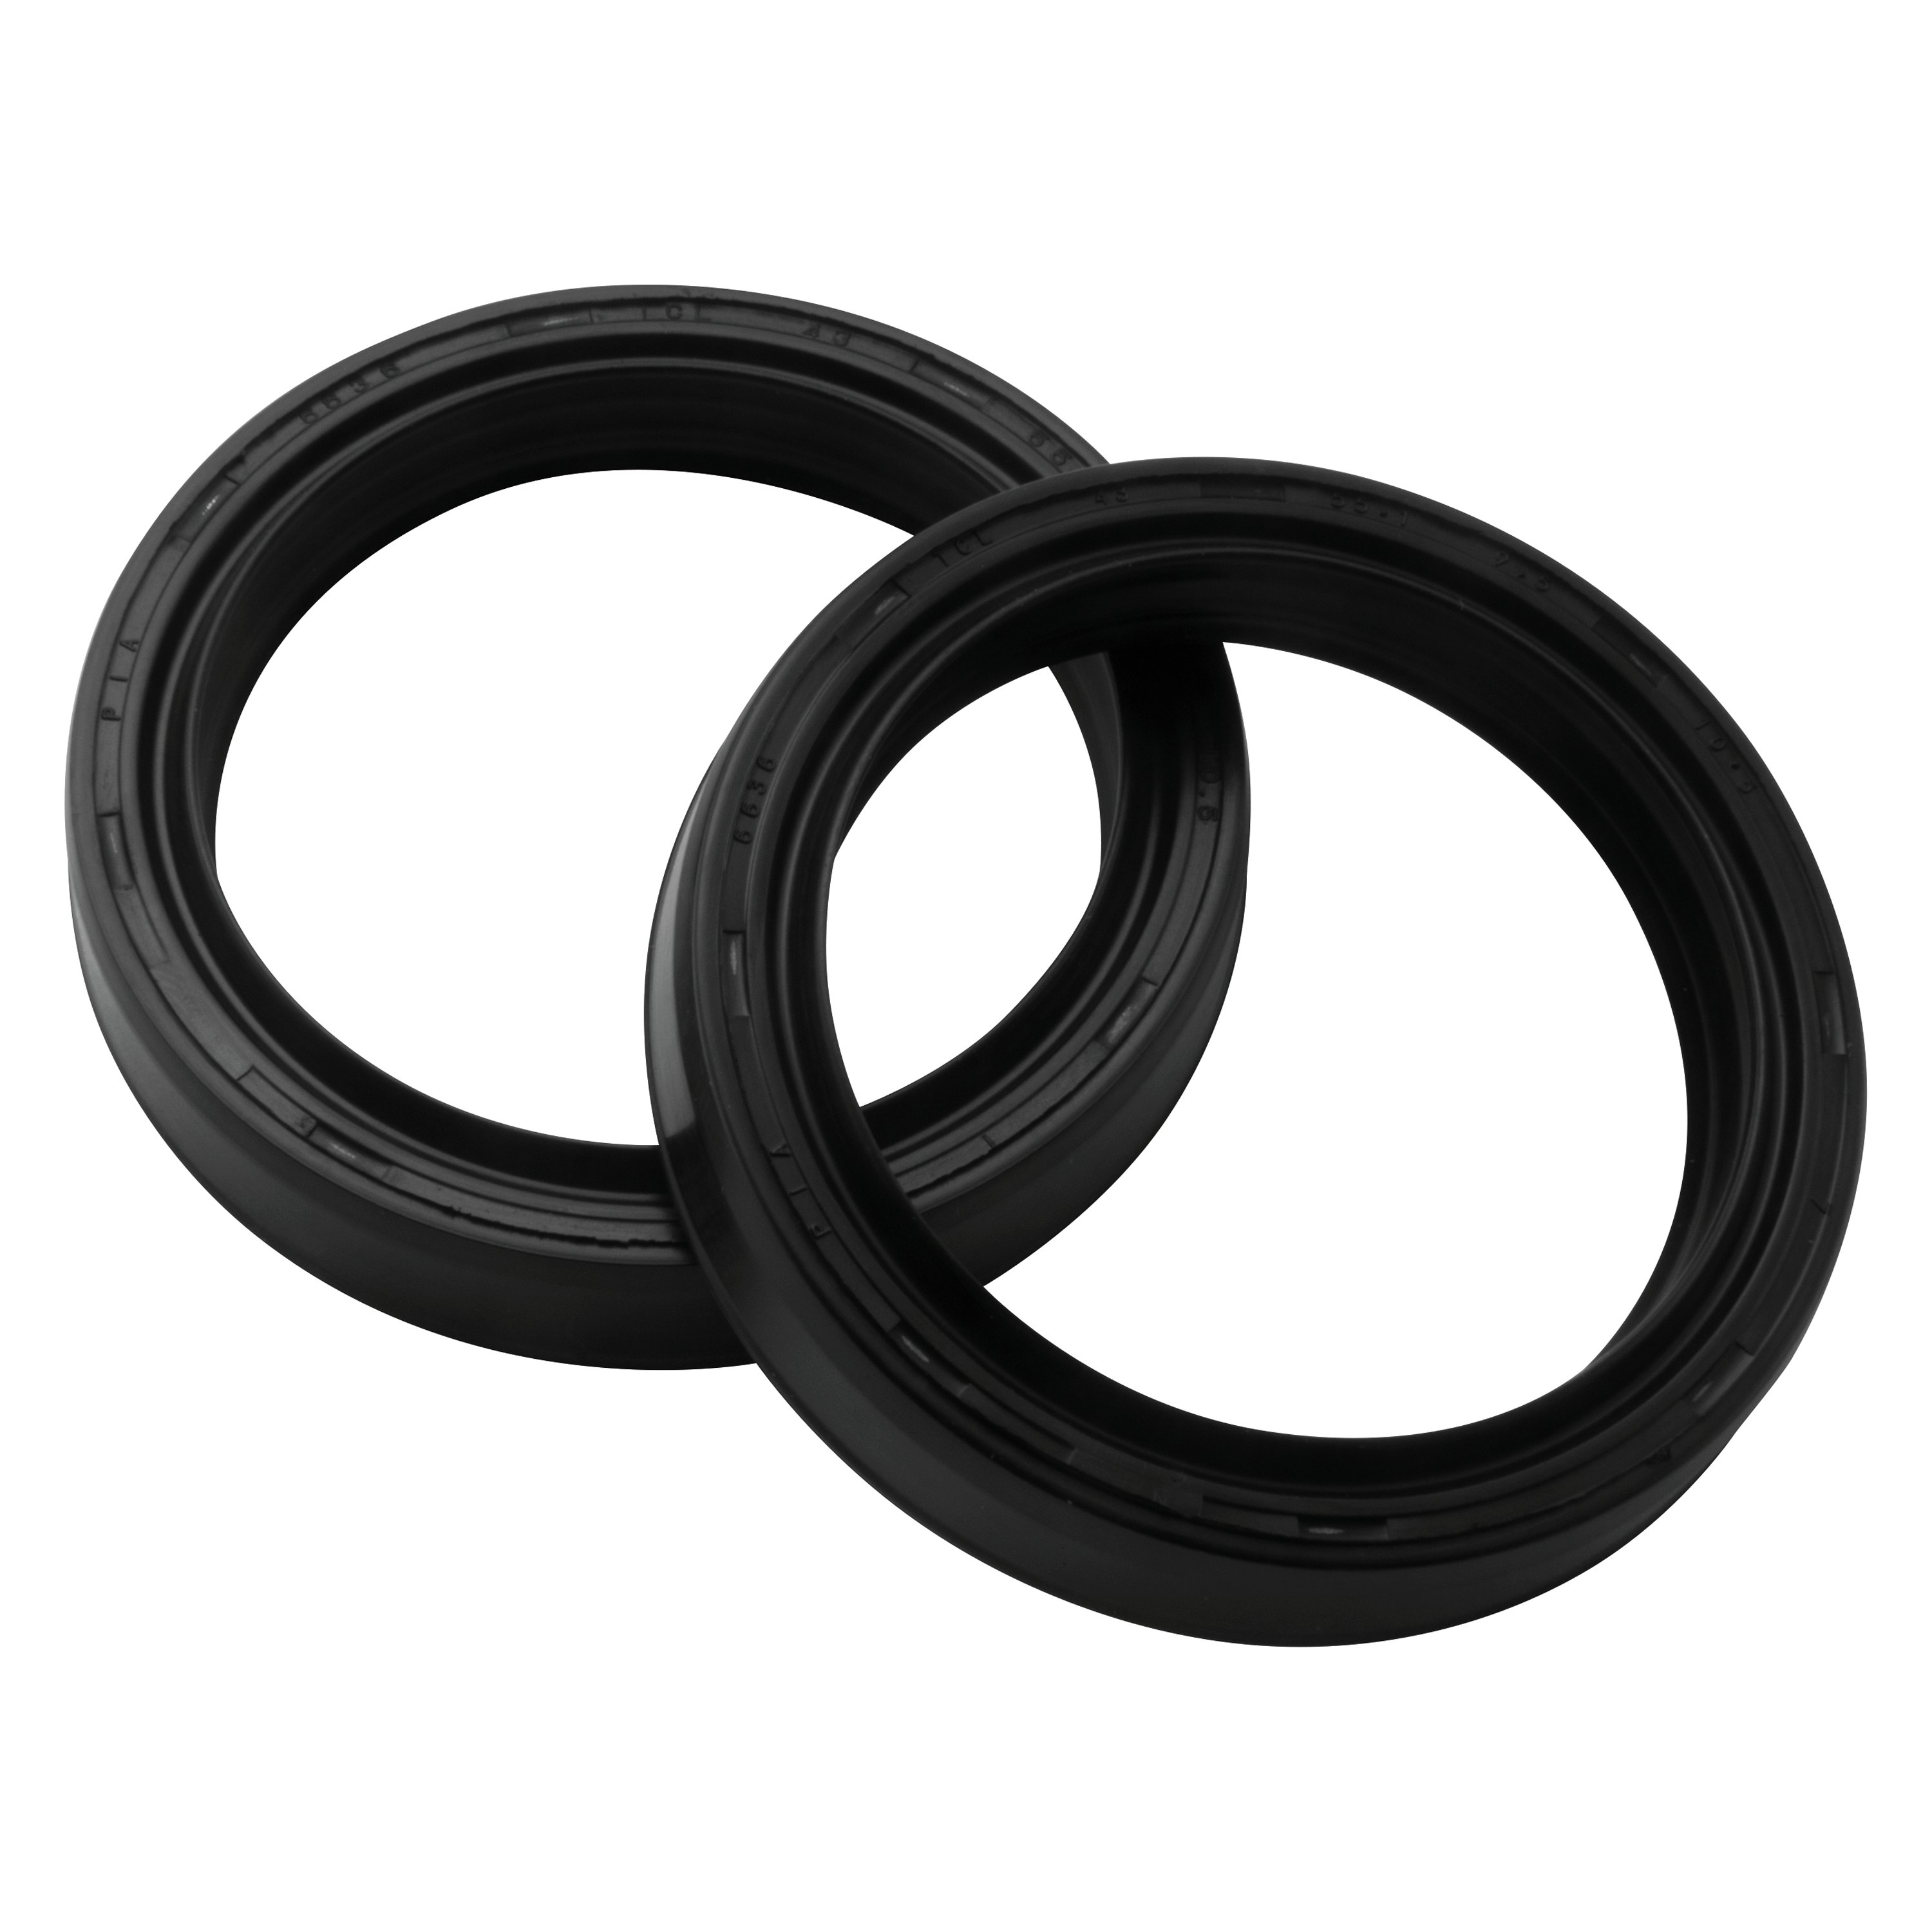 Details about   Fork Seals For 1993 Yamaha WR250 Offroad Motorcycle Wiseco 40.F43559